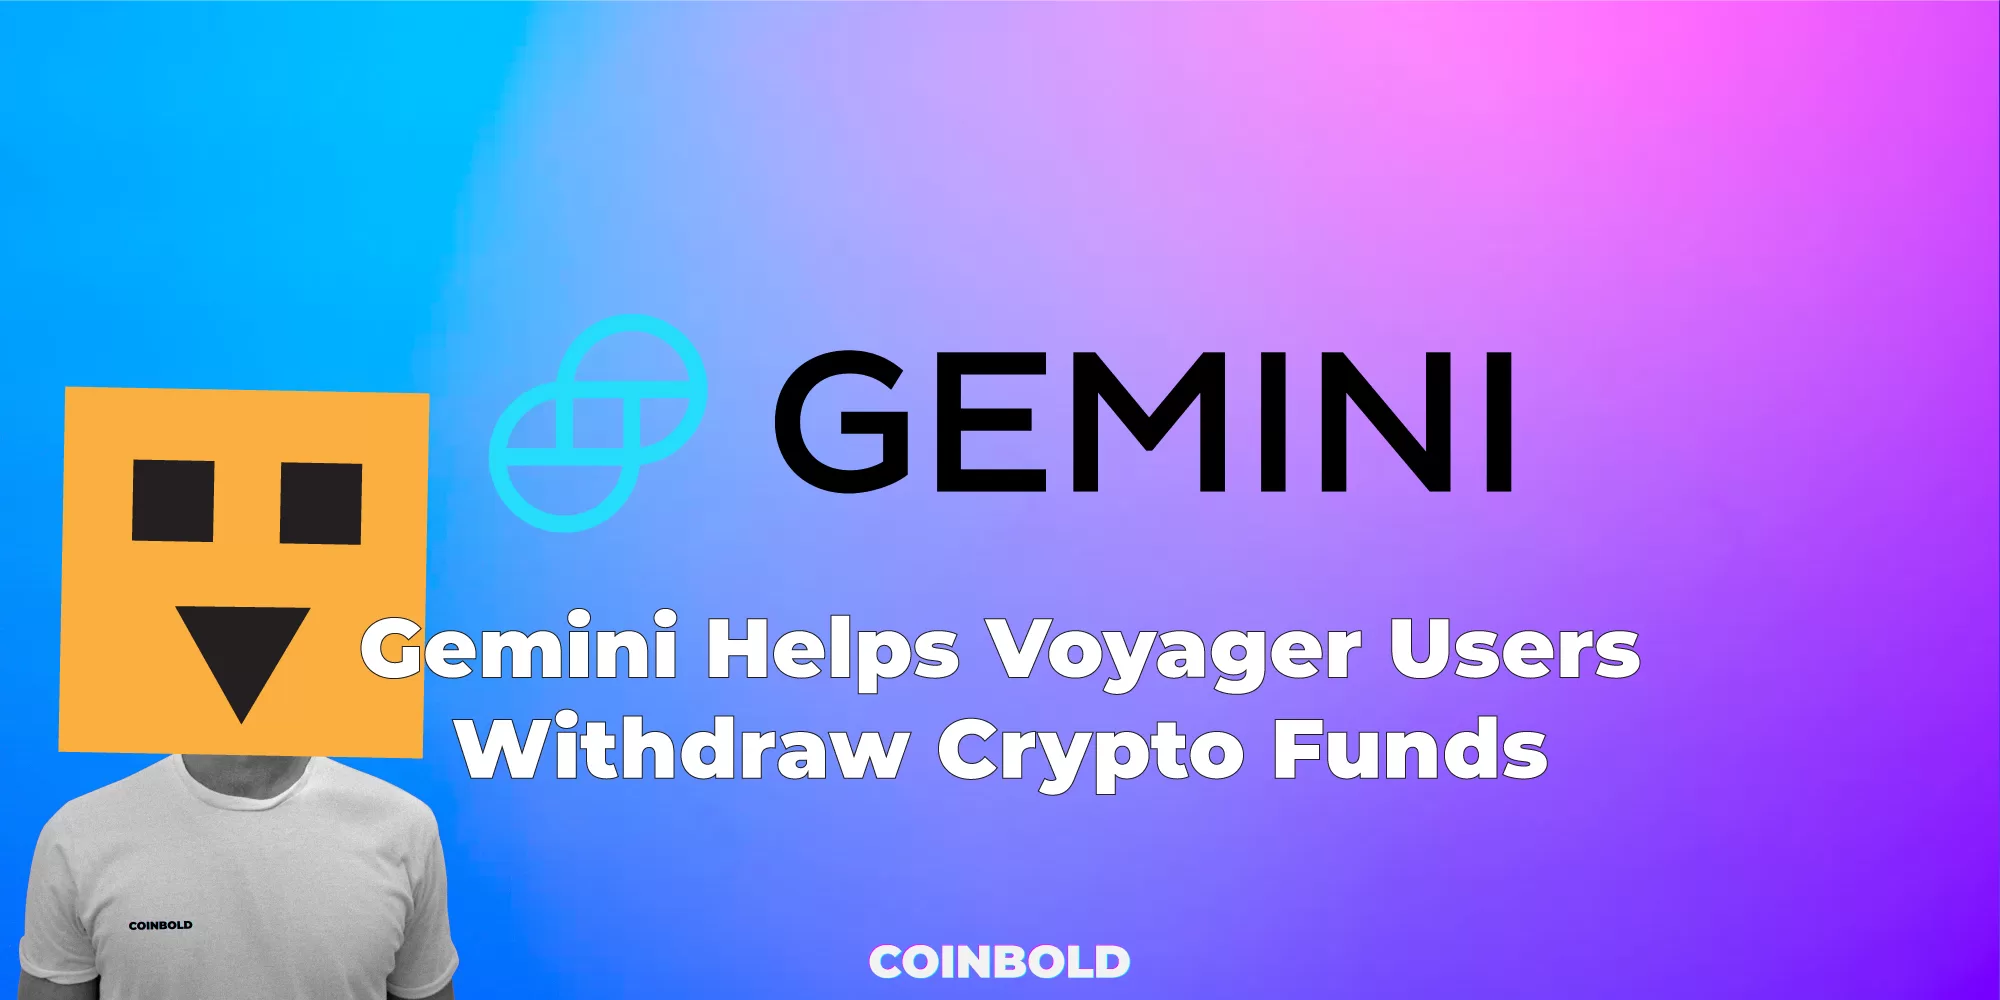 Gemini Helps Voyager Users Withdraw Crypto Funds